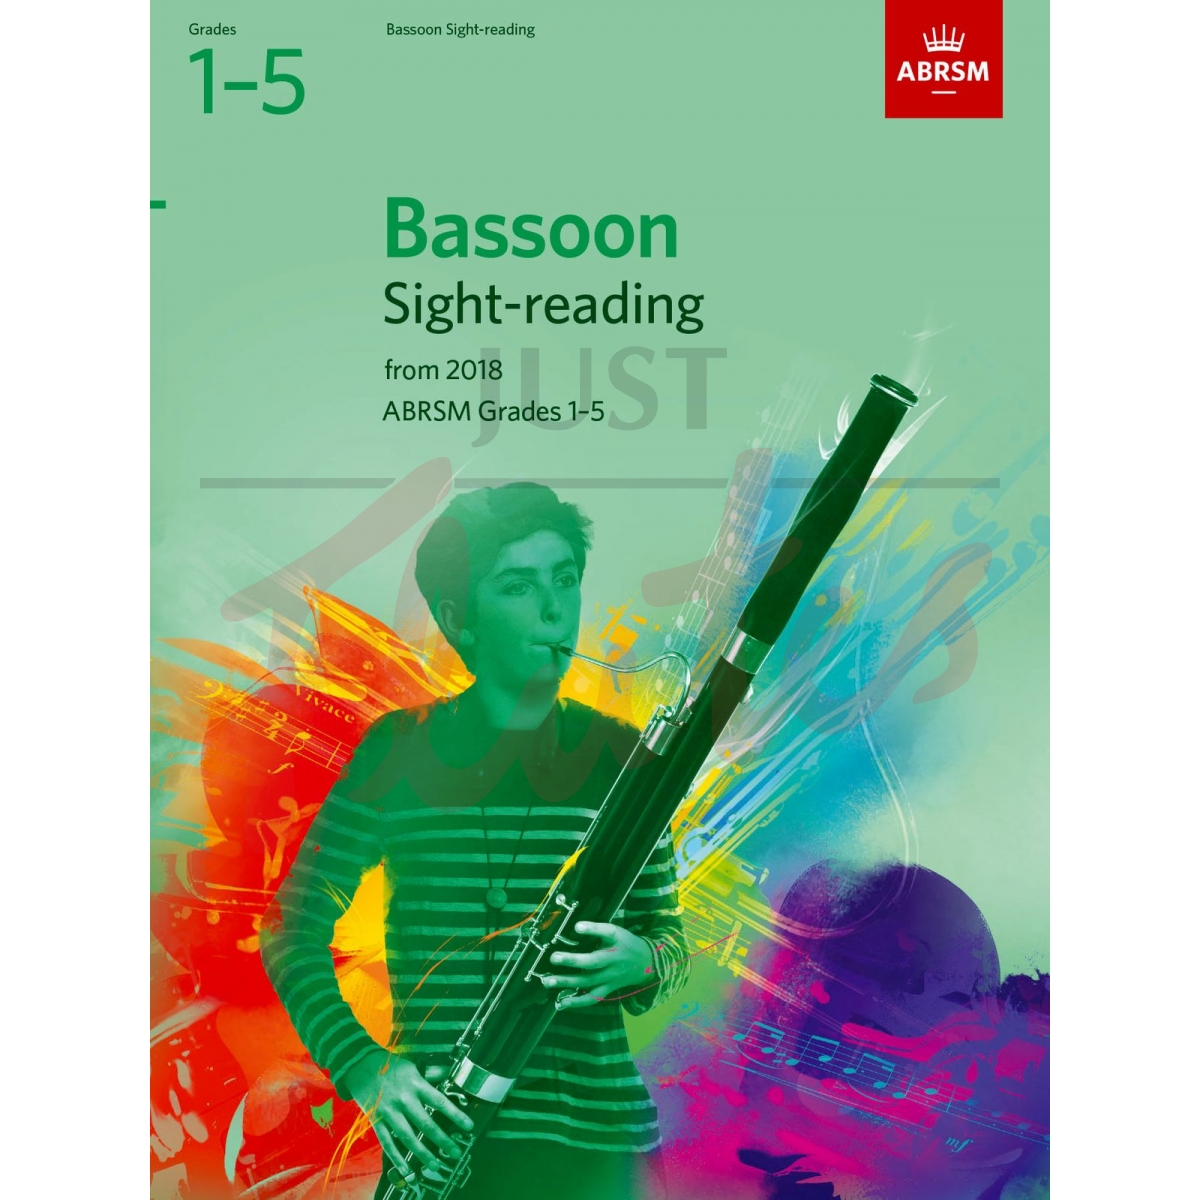 Sight-Reading Tests Grades 1-5 (from 2018) [Bassoon]